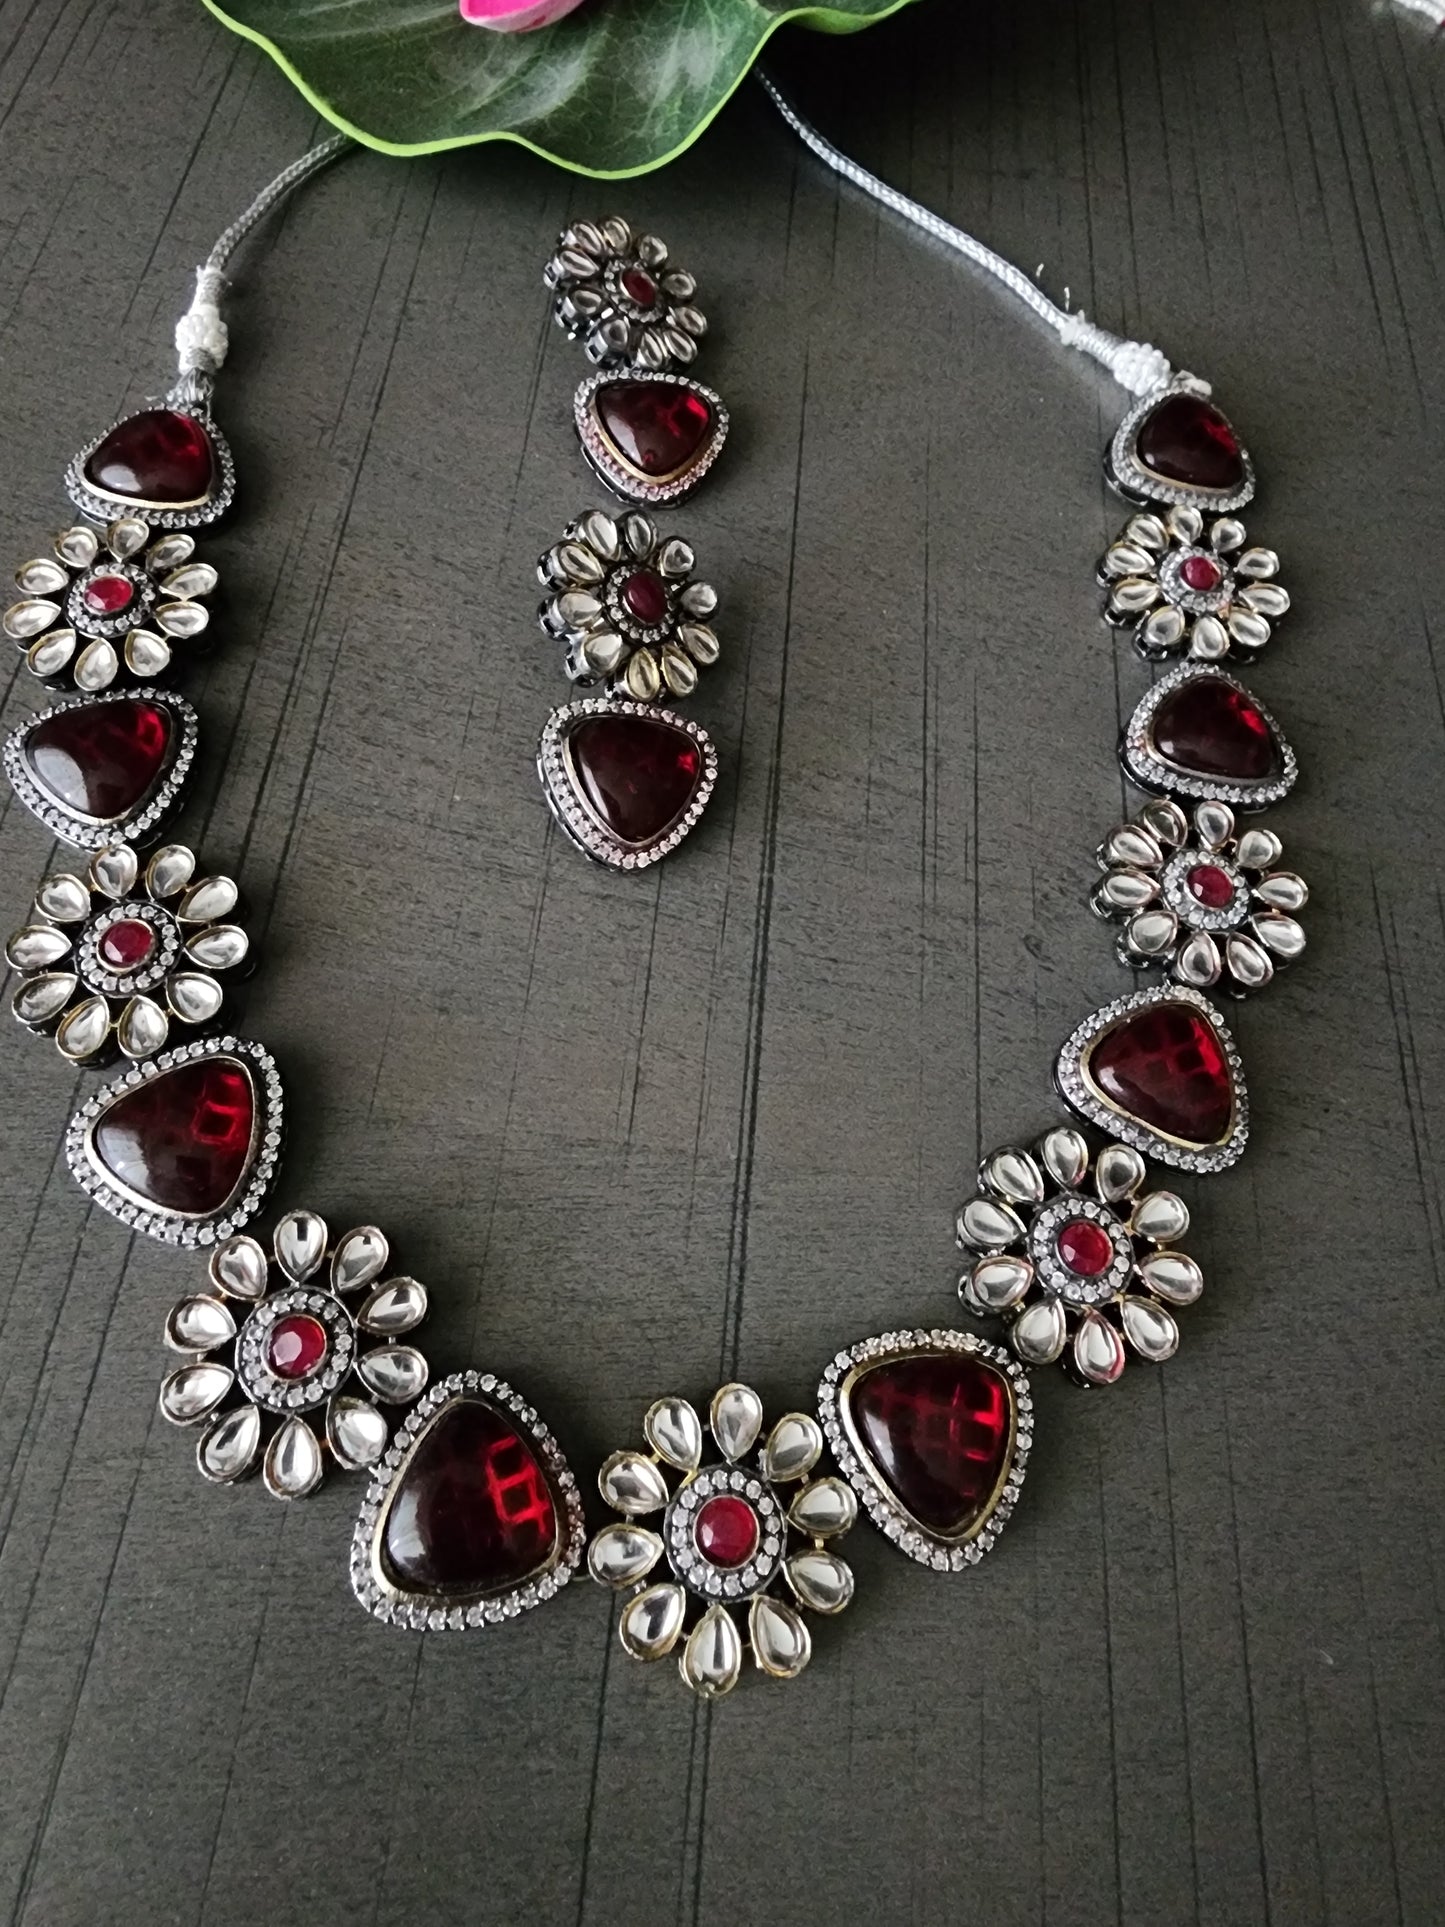 Sabby Sachhi Inspired Necklace and Earrings